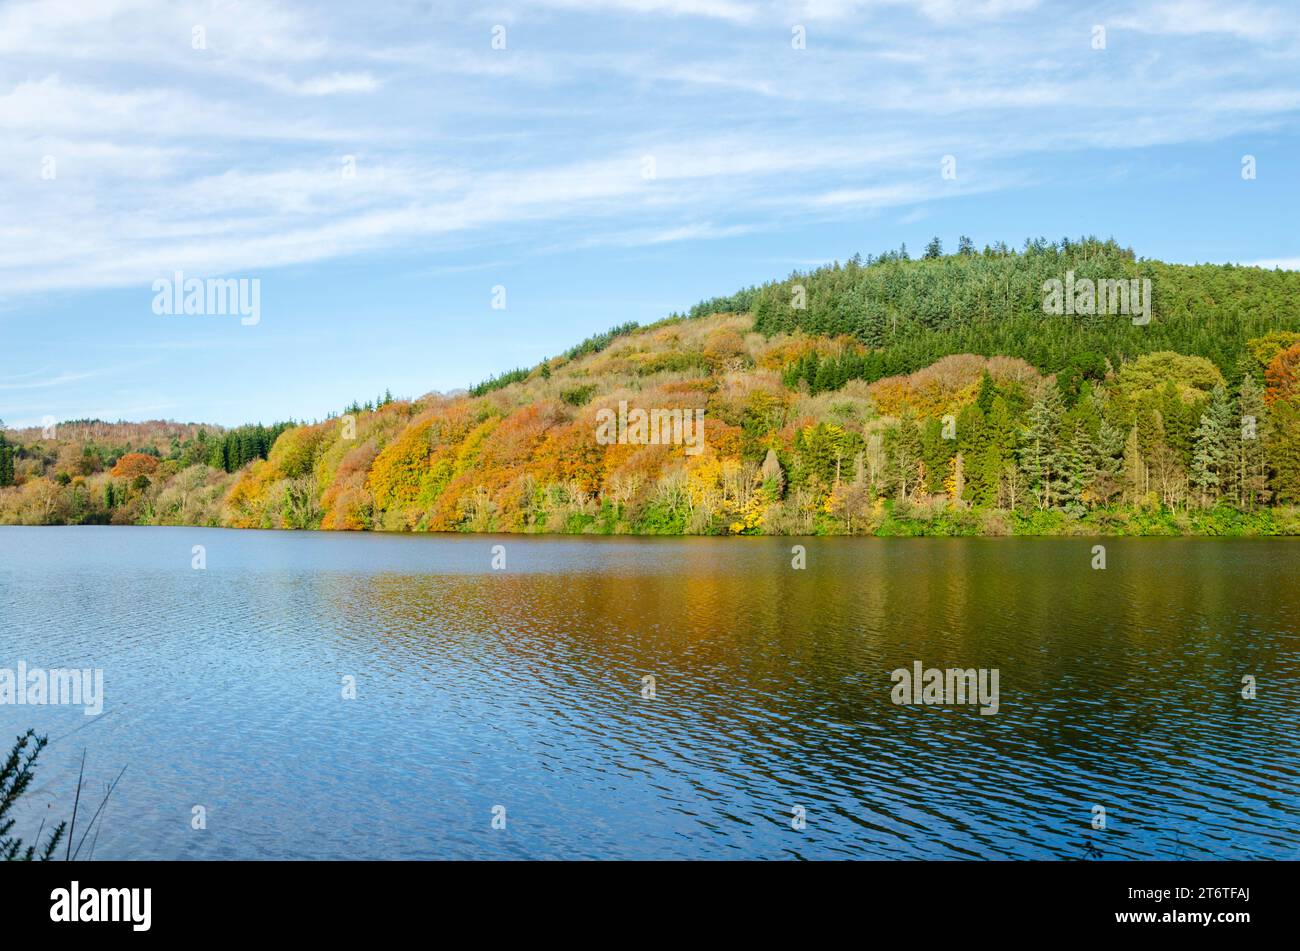 Castlewellan, County Down, Northern Ireland, tree-lined lake with Autumn colours, ideal for hiking, cycling, kayaking and family picnics Stock Photo